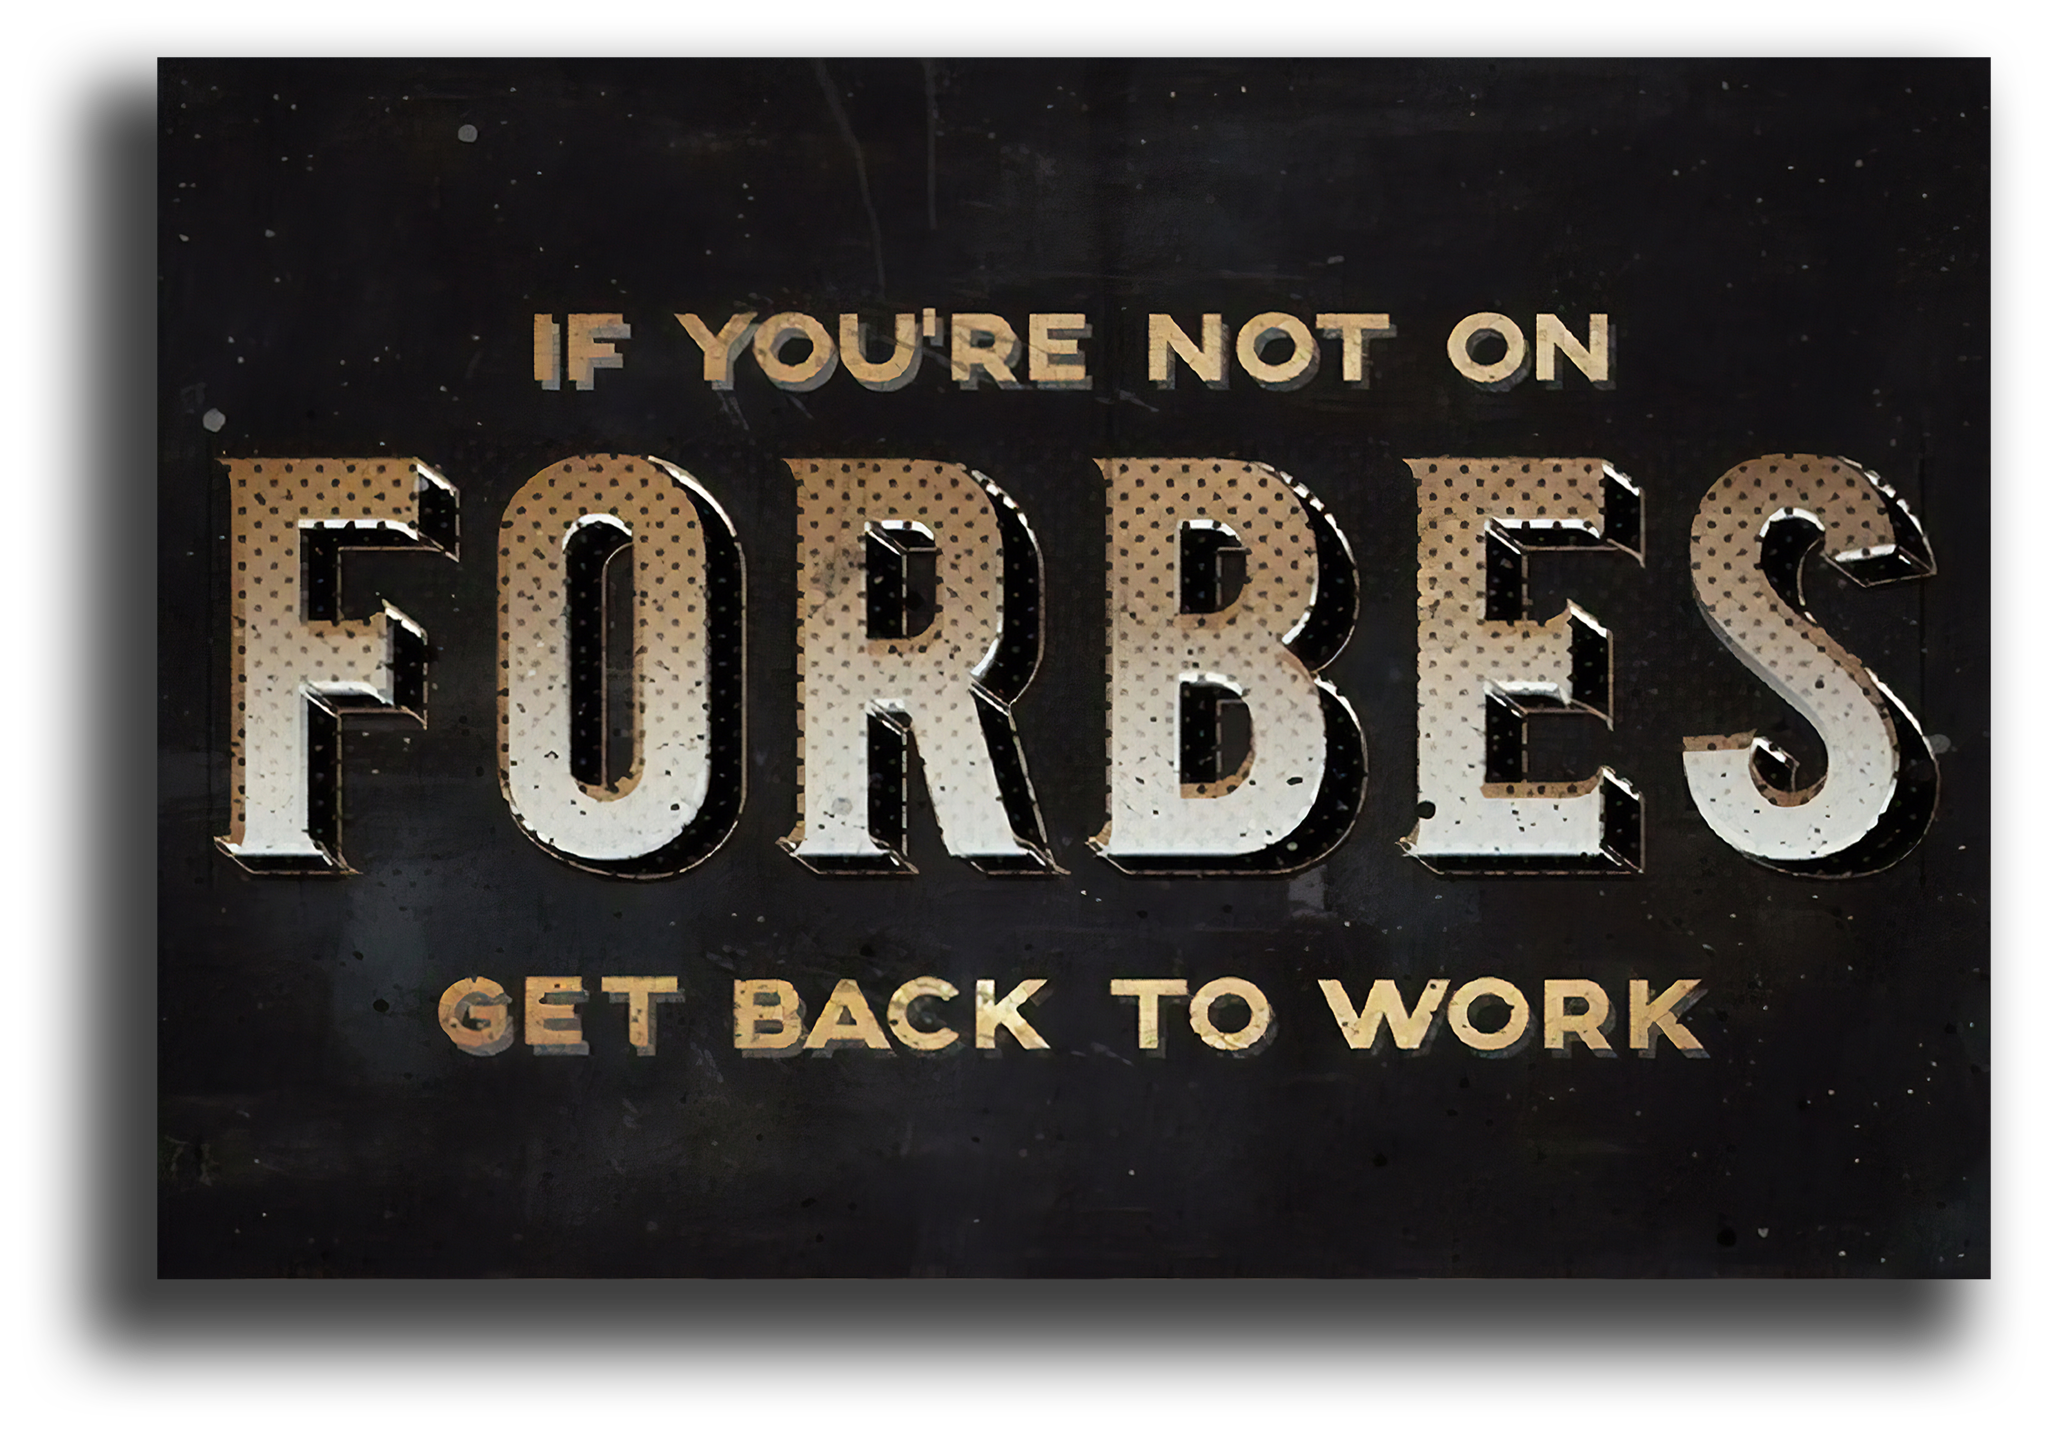 Get back to word. Постер "форбс". Форбс арт. If you are not on Forbes get back to work картина. If you are not Forbes get back to work.